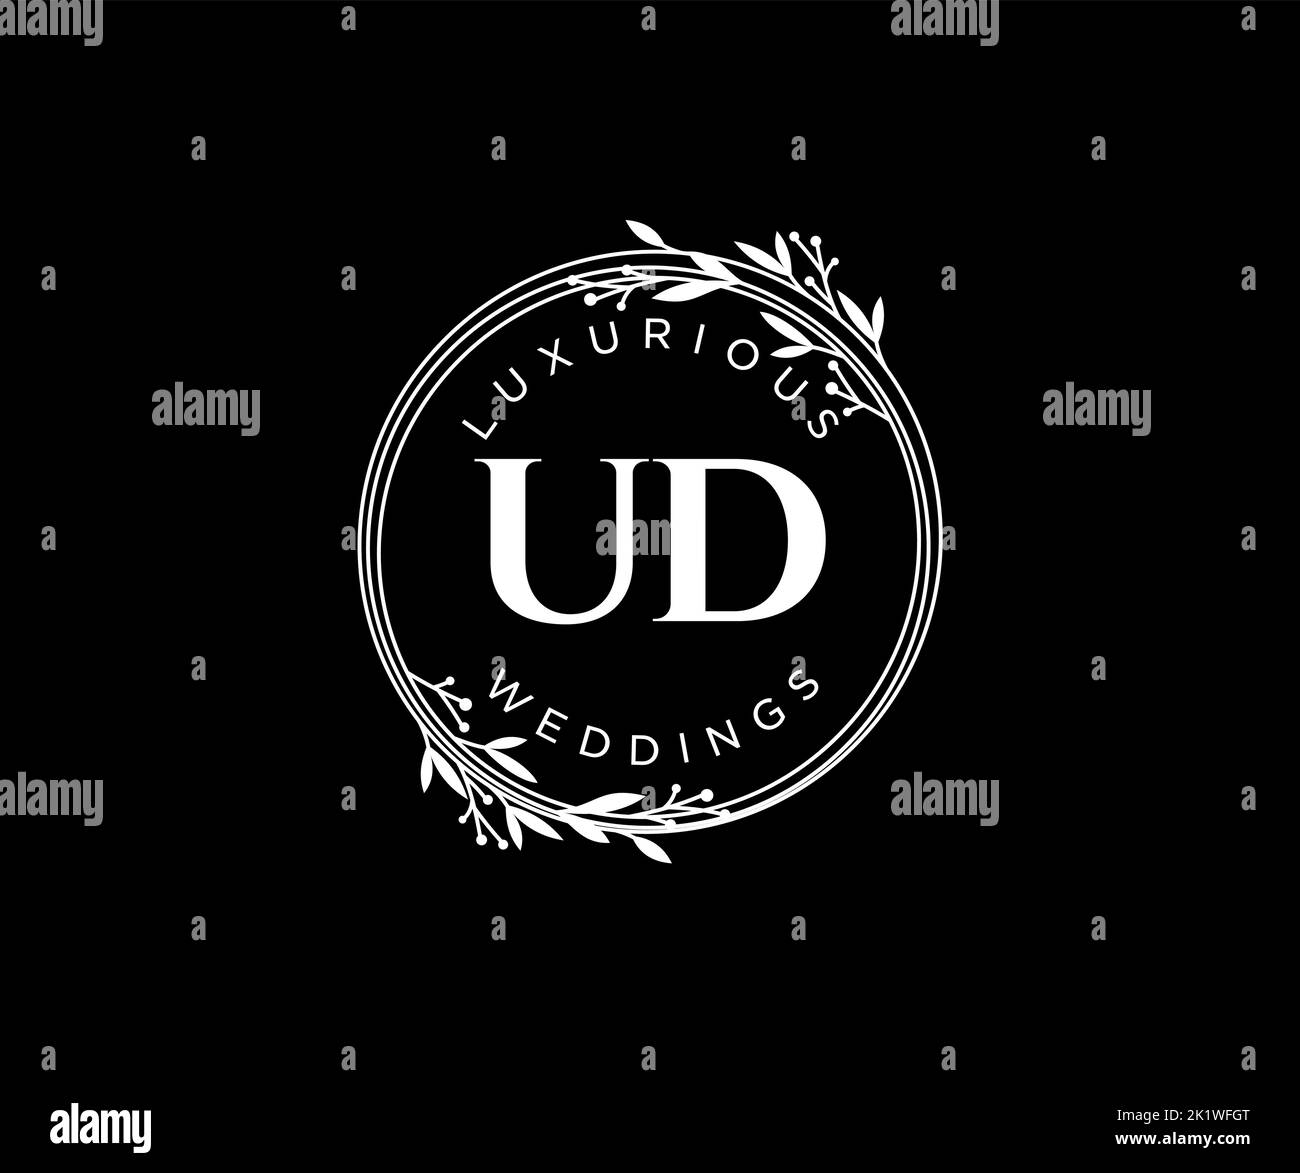 UD Initials letter Wedding monogram logos template, hand drawn modern minimalistic and floral templates for Invitation cards, Save the Date, elegant Stock Vector